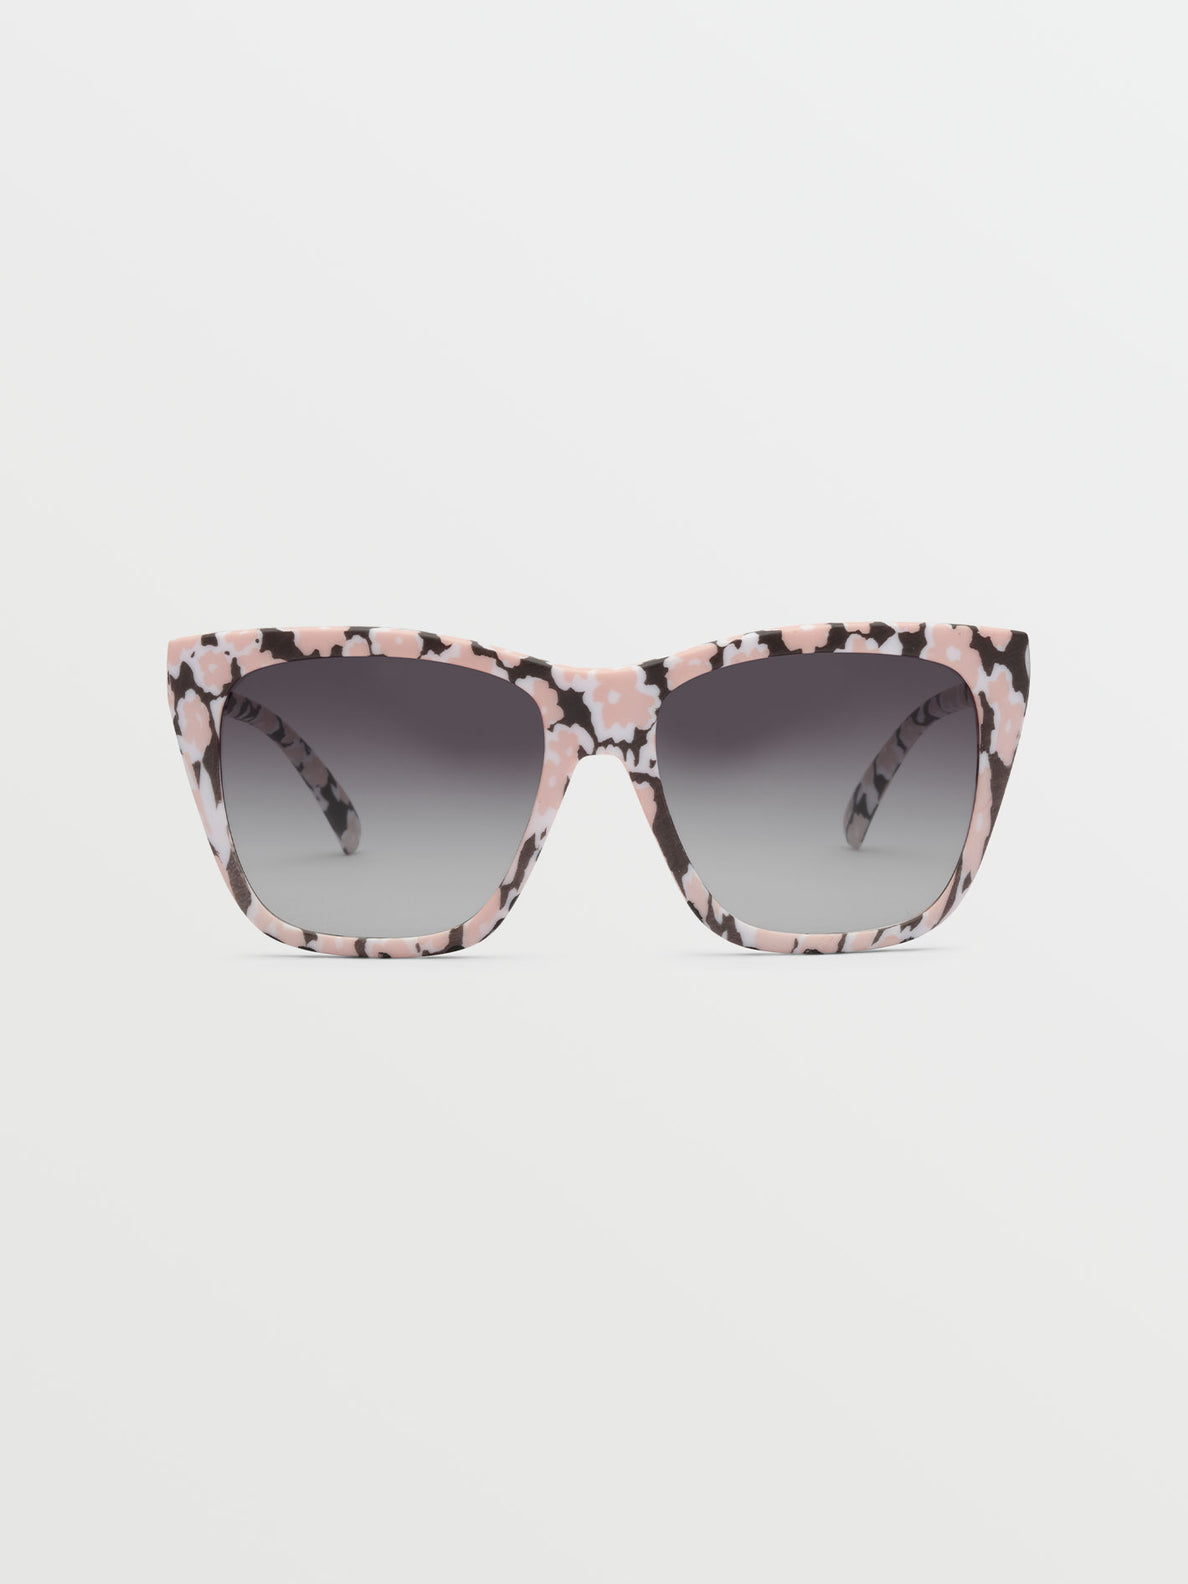 Looky Lou Sunglasses - What's Poppin/Gray Gradient